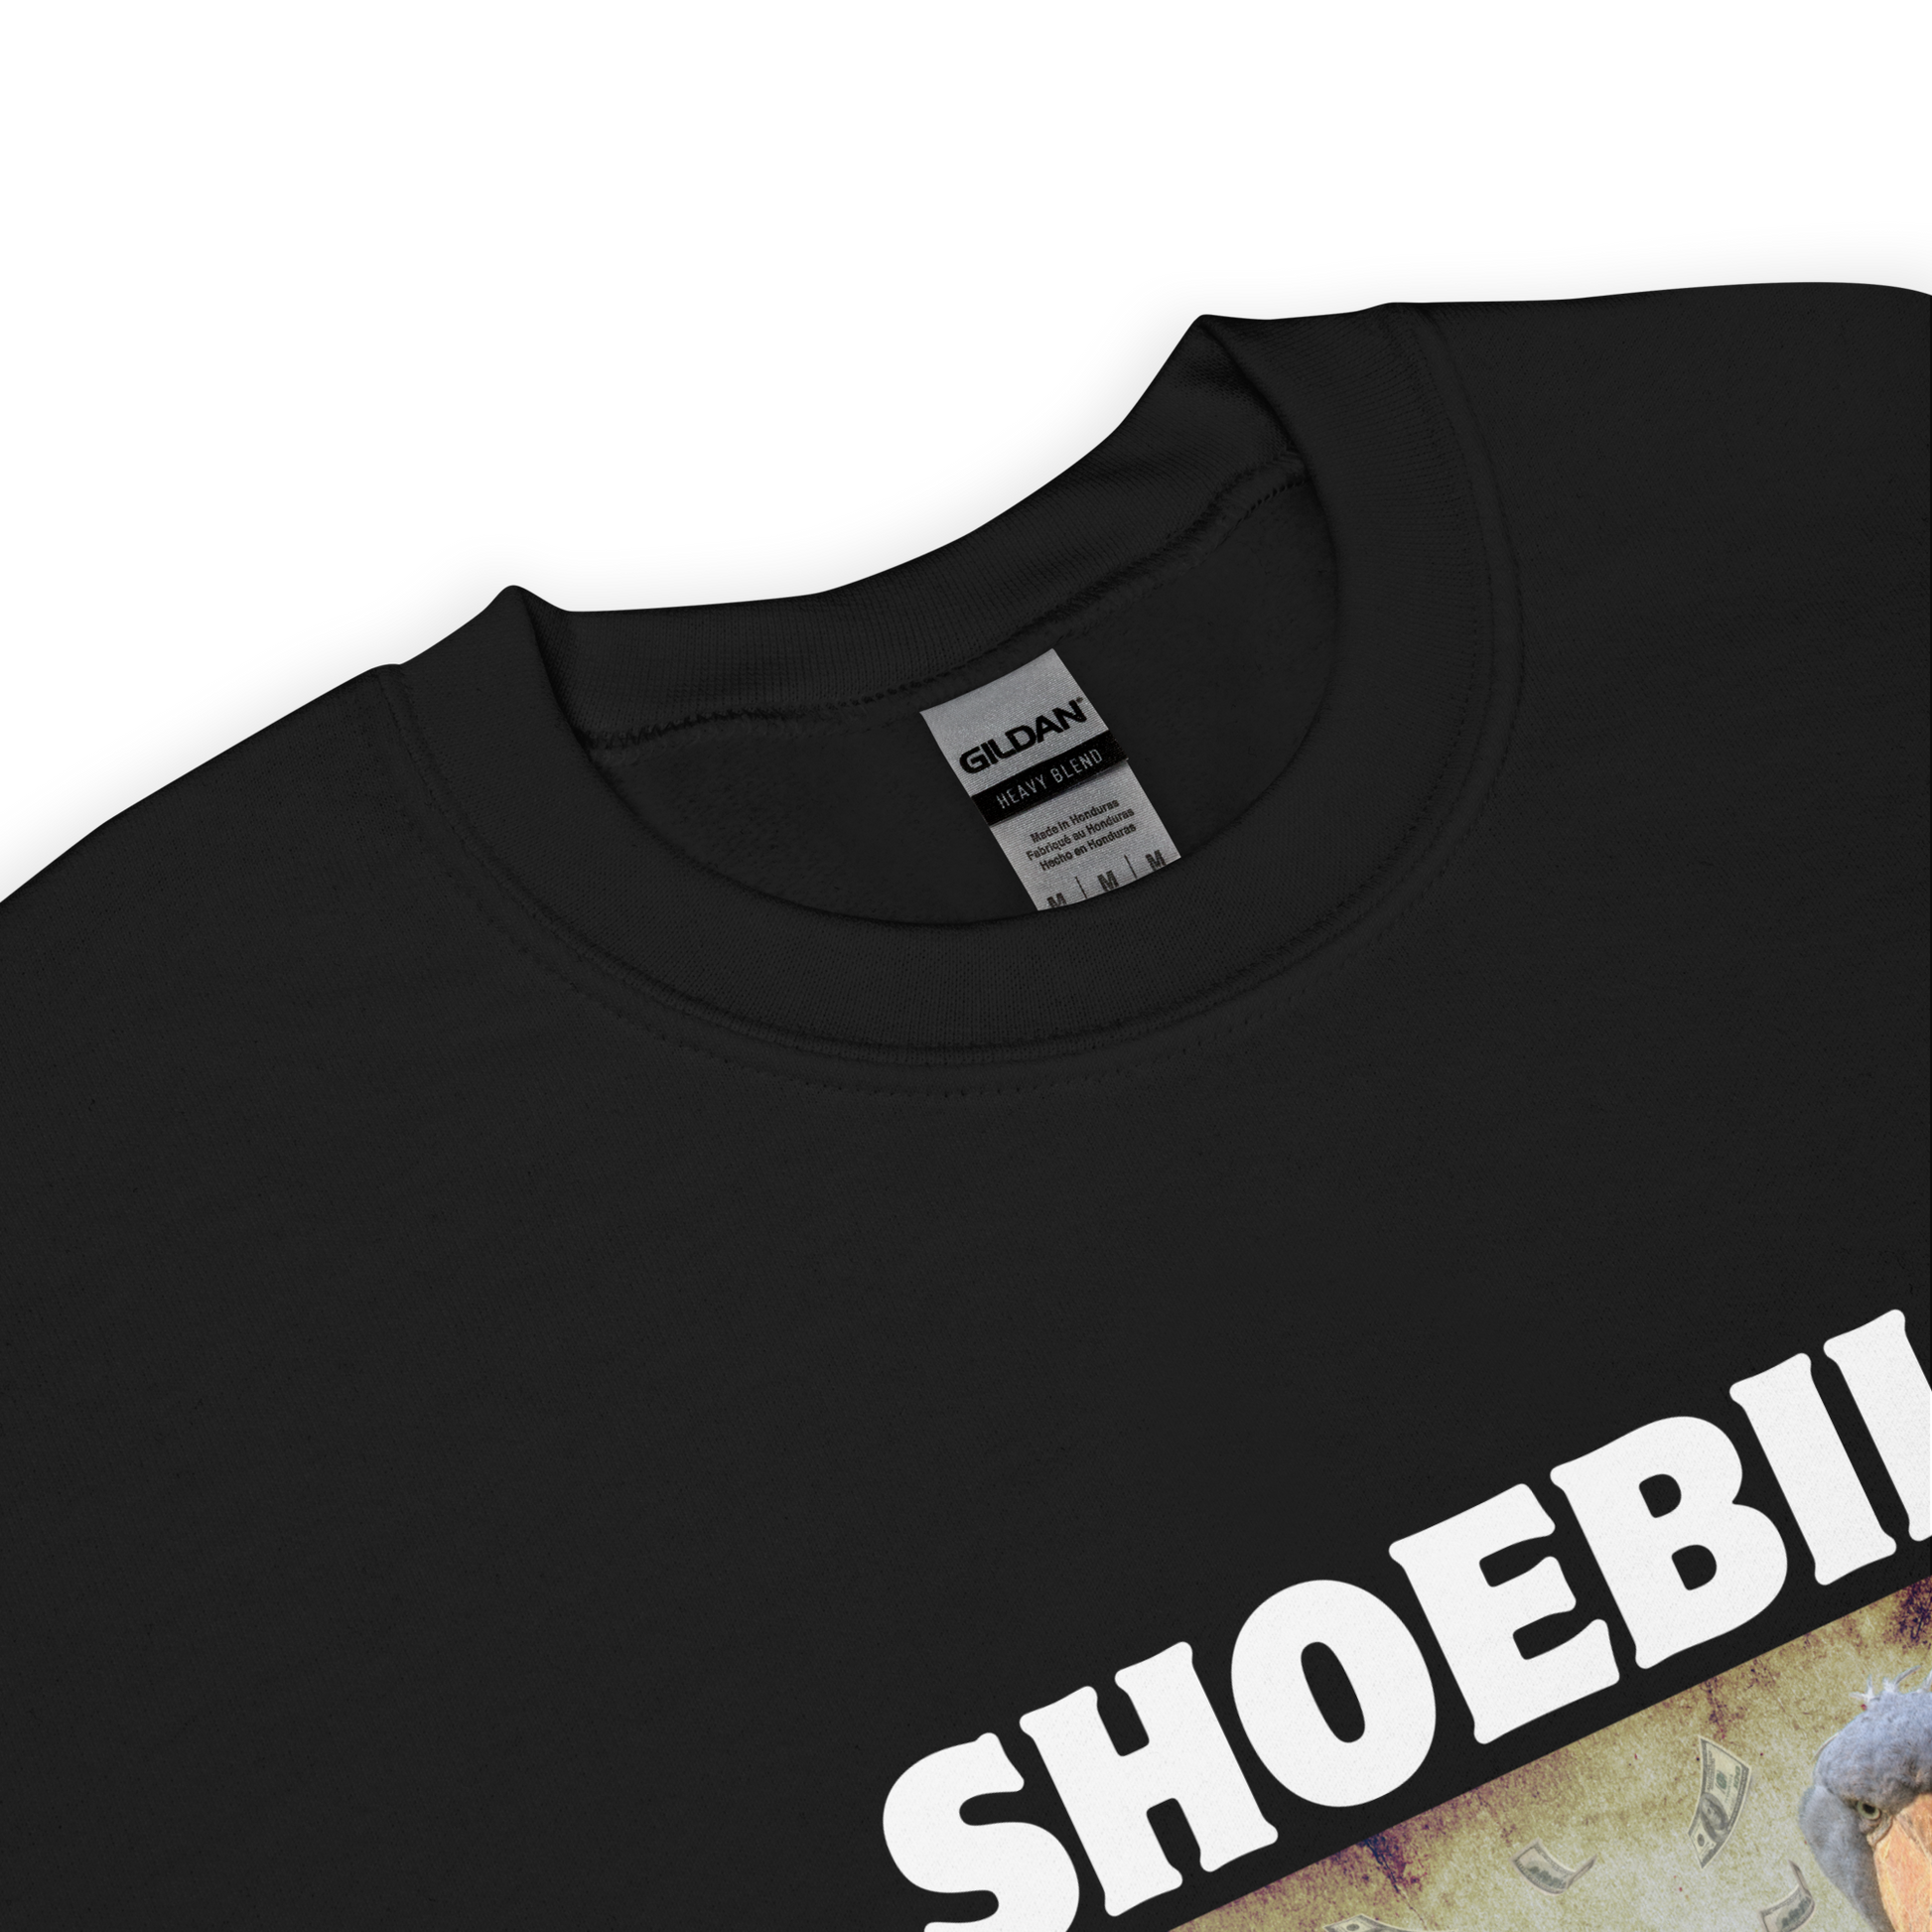 Product details of a Black Shoebill Sweatshirt featuring a cool Shoebill graphic on the chest - Artsy/Funny Graphic Shoebill Stork Sweatshirts - Boozy Fox